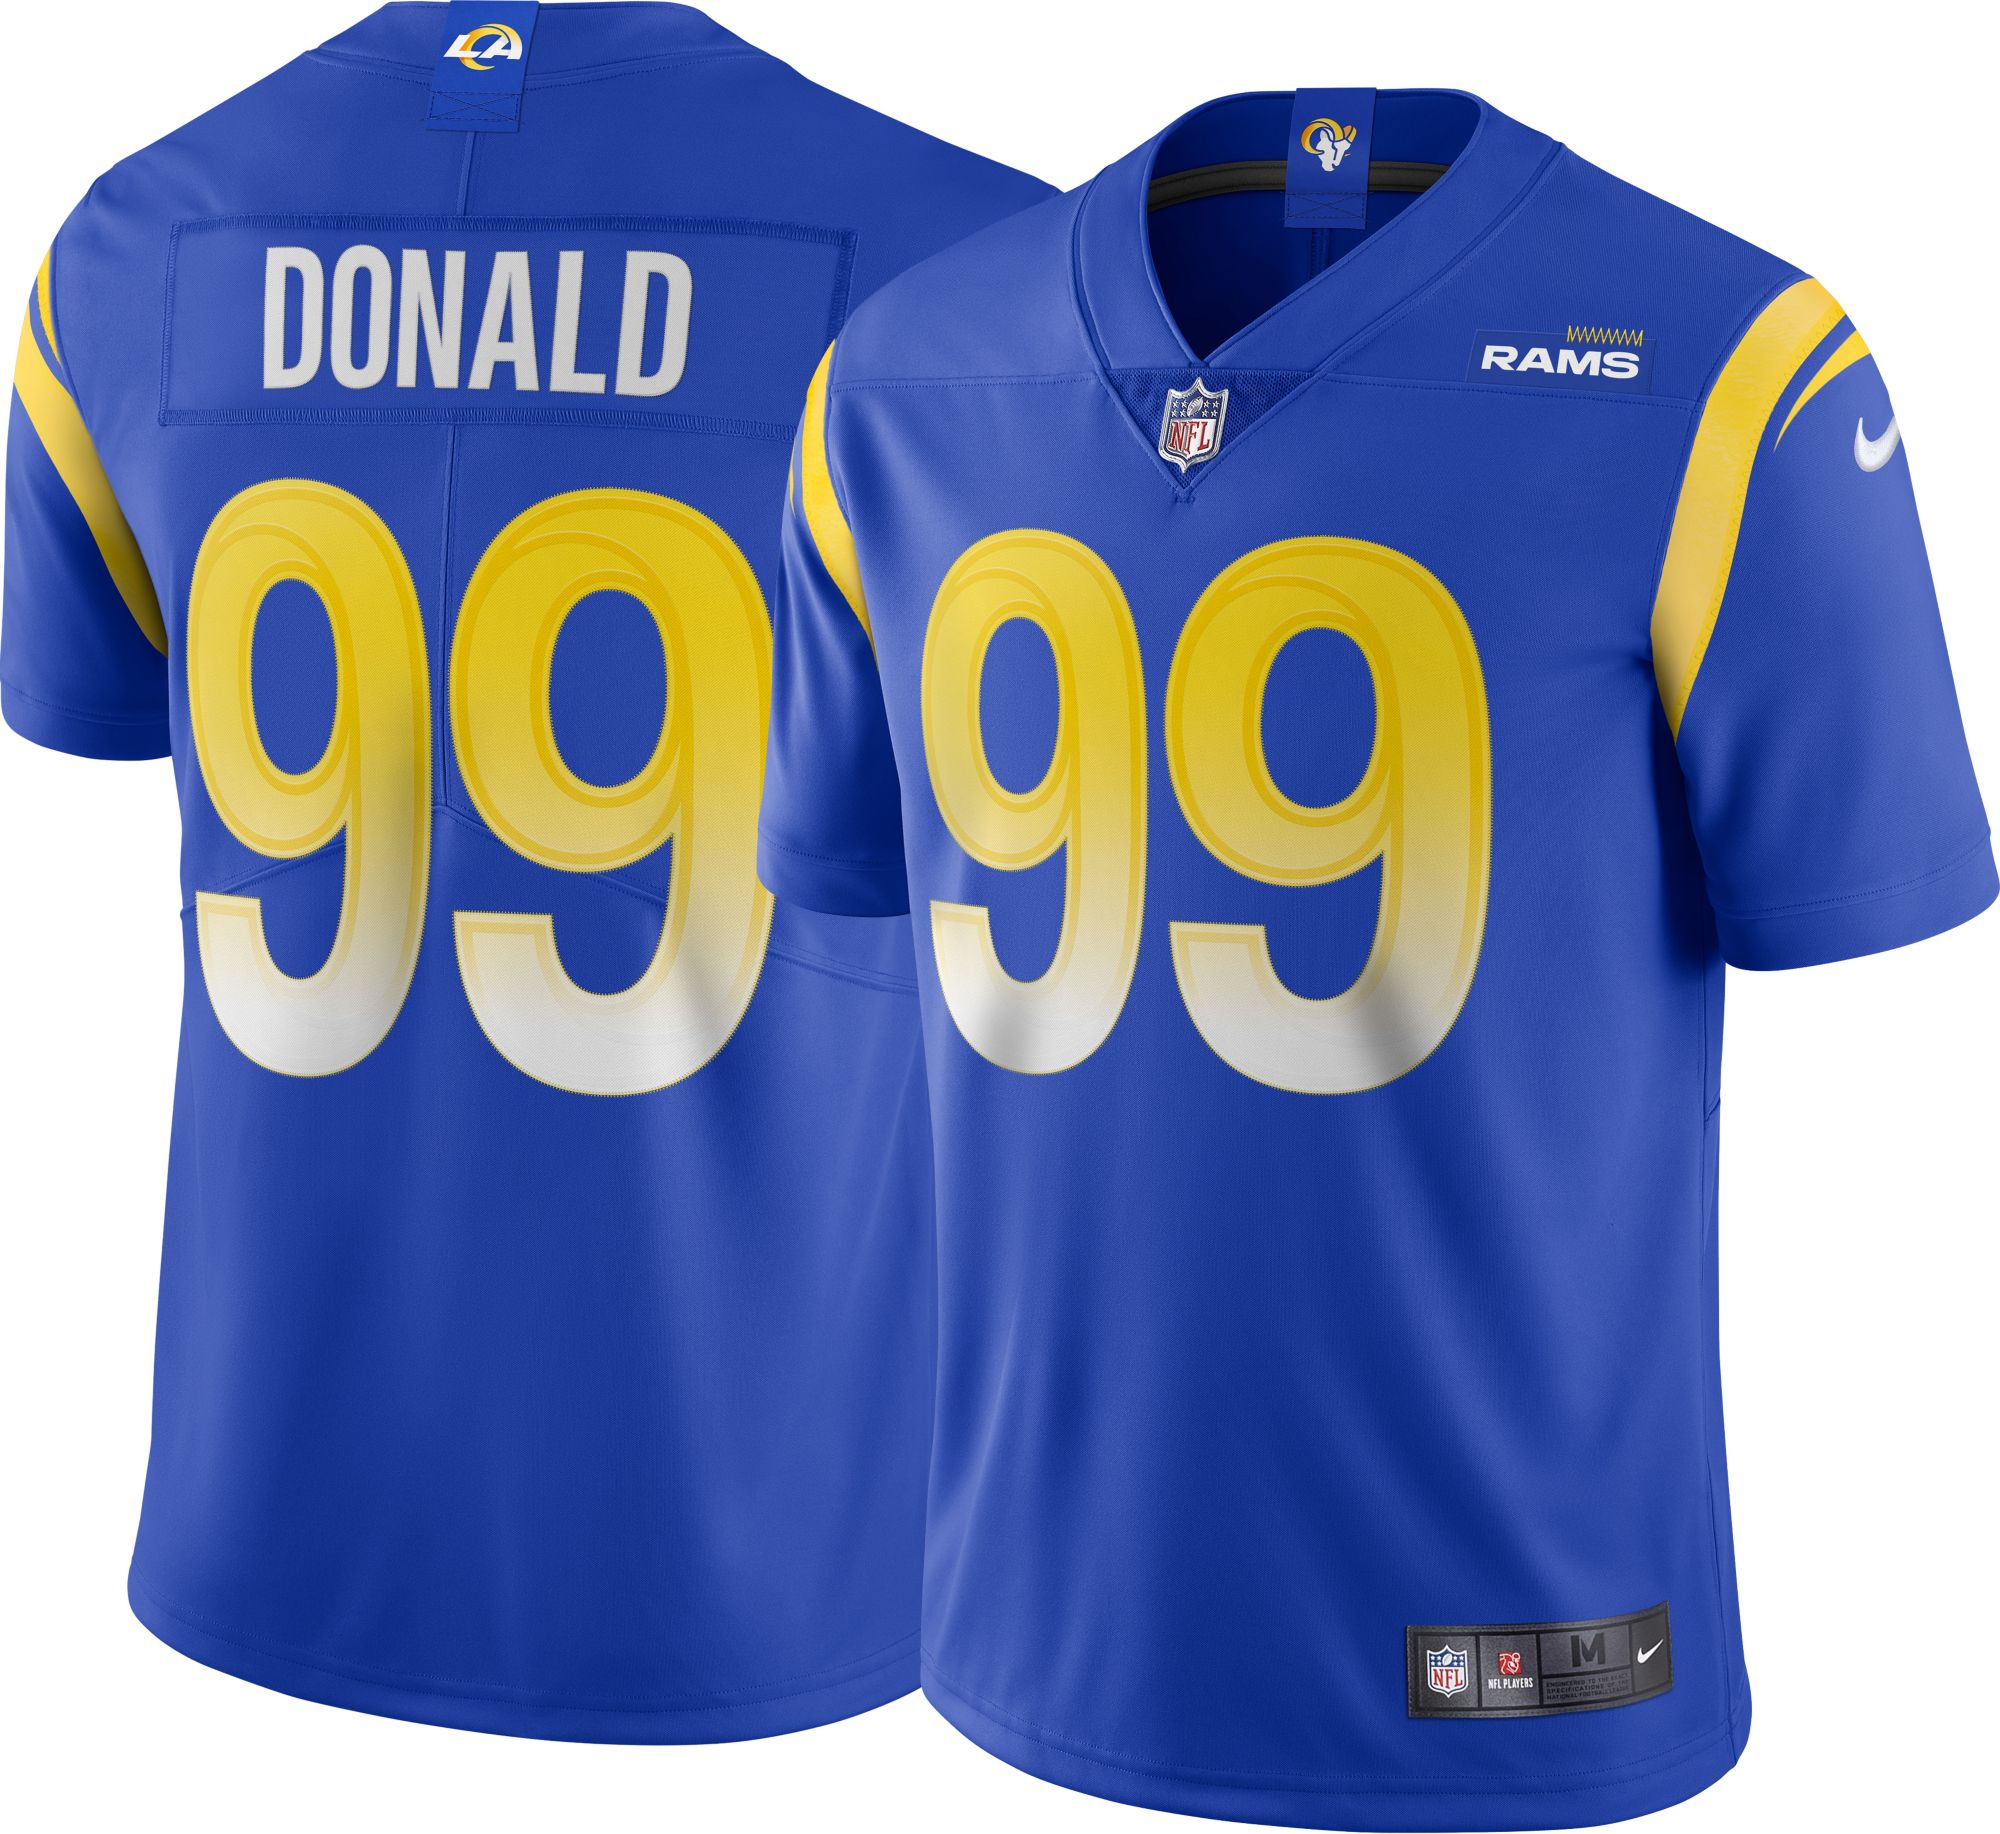 are the nike nfl game jerseys stitched